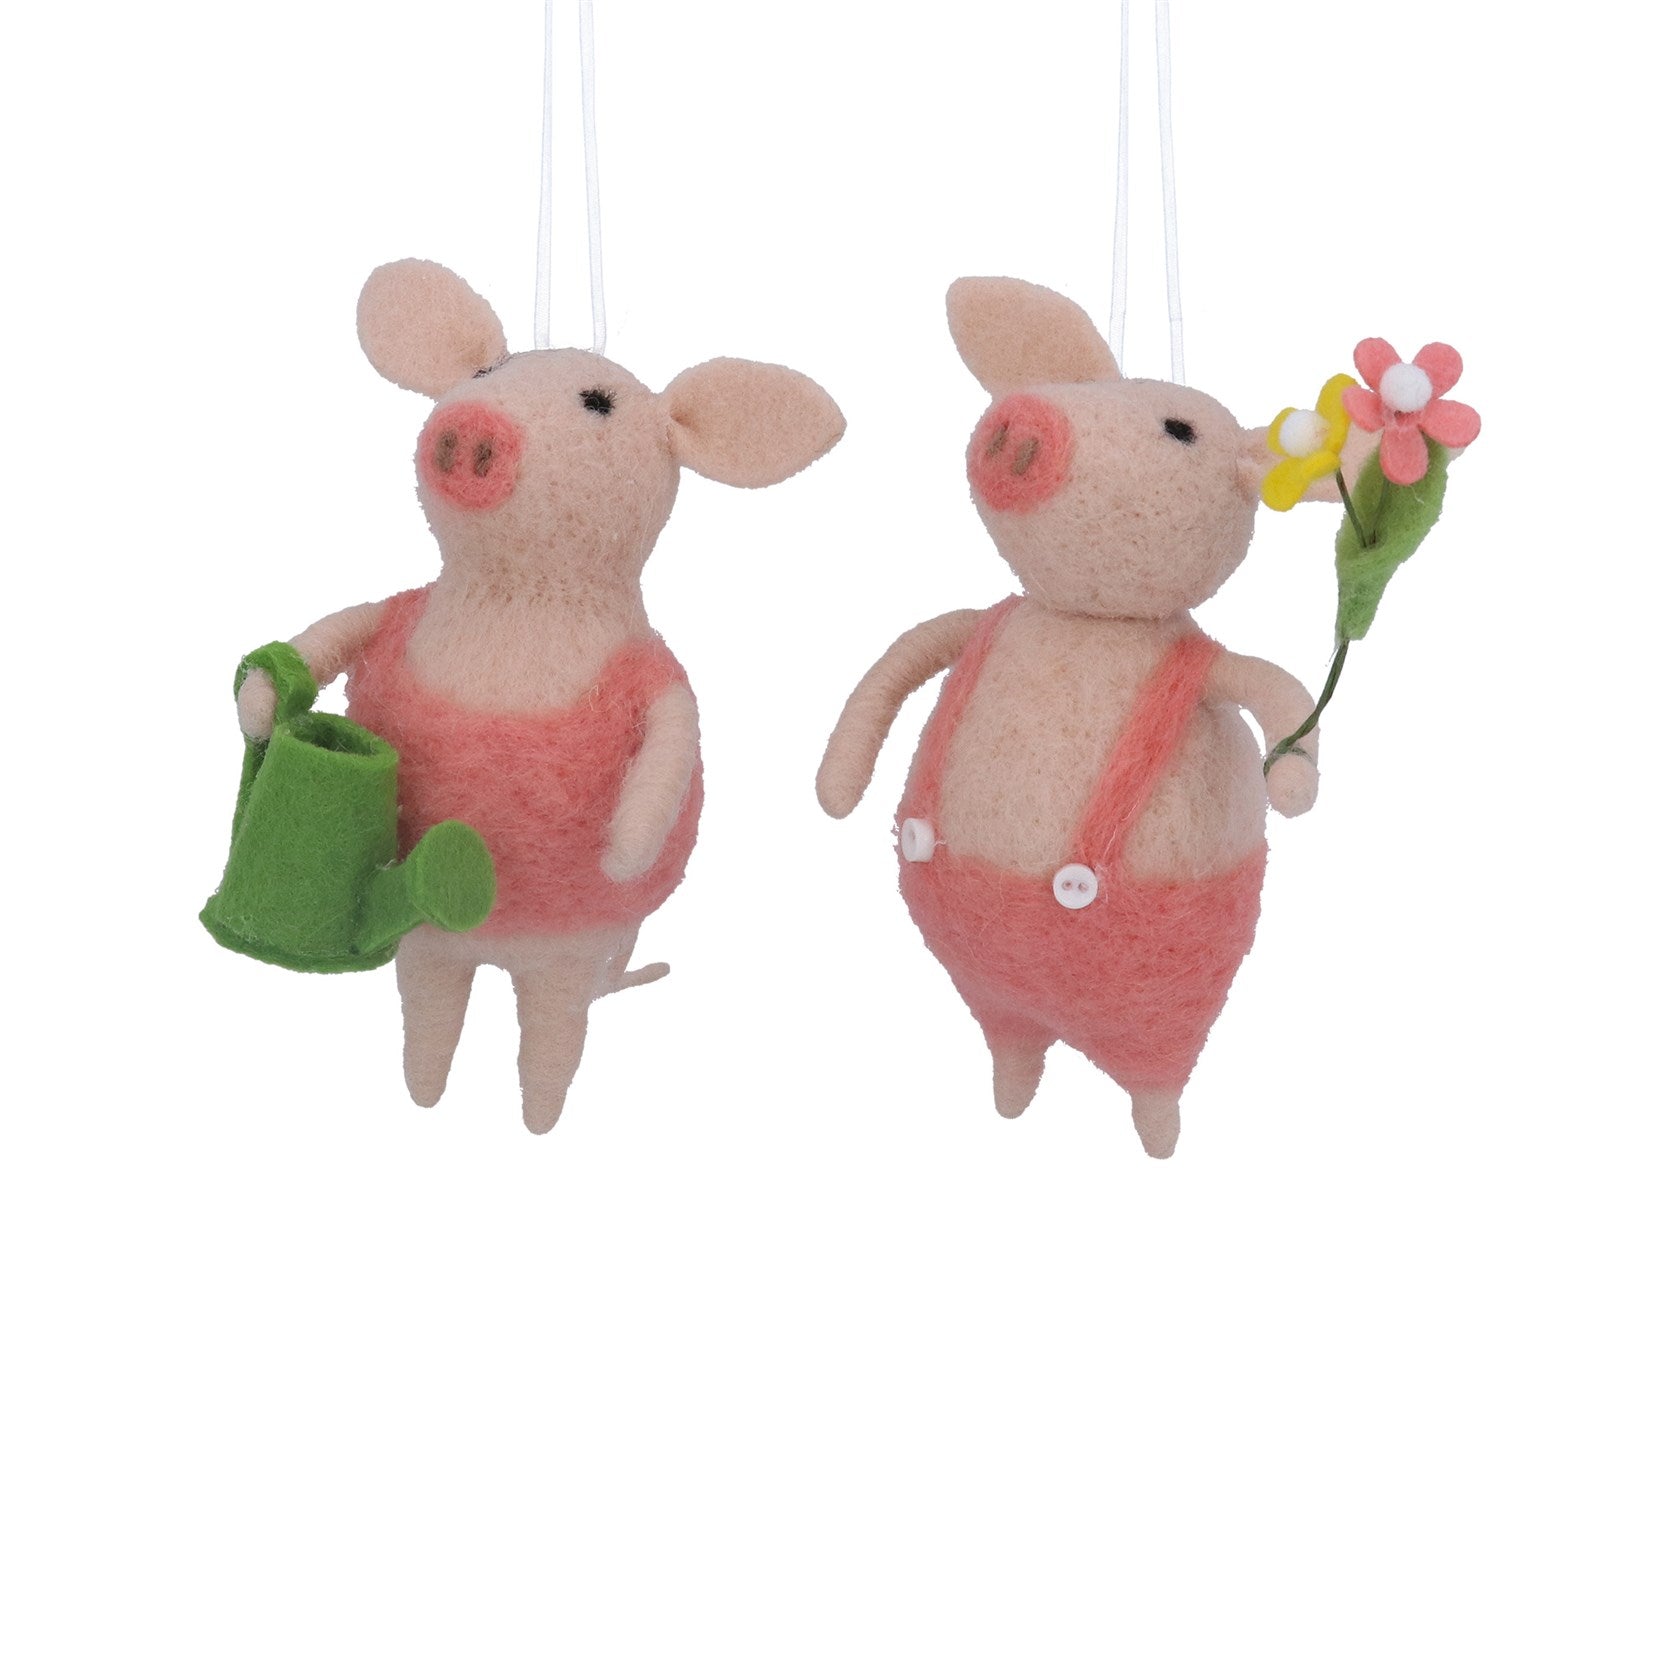 Mixed Wool Mr or Mrs Pig Hanging Decorations